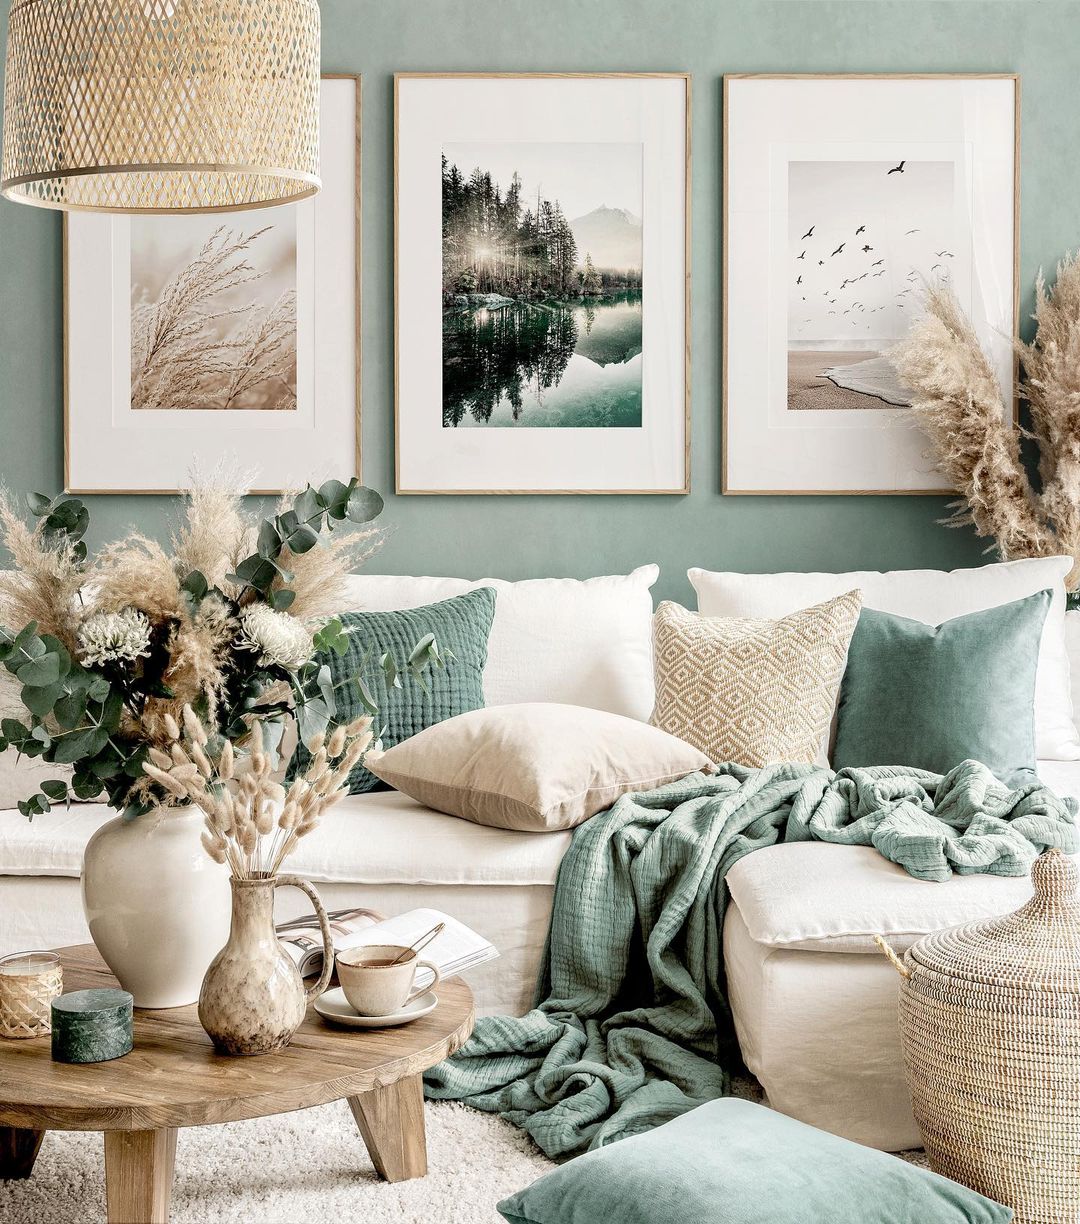 Decorative Home Decor: Adding Beauty To Your Home